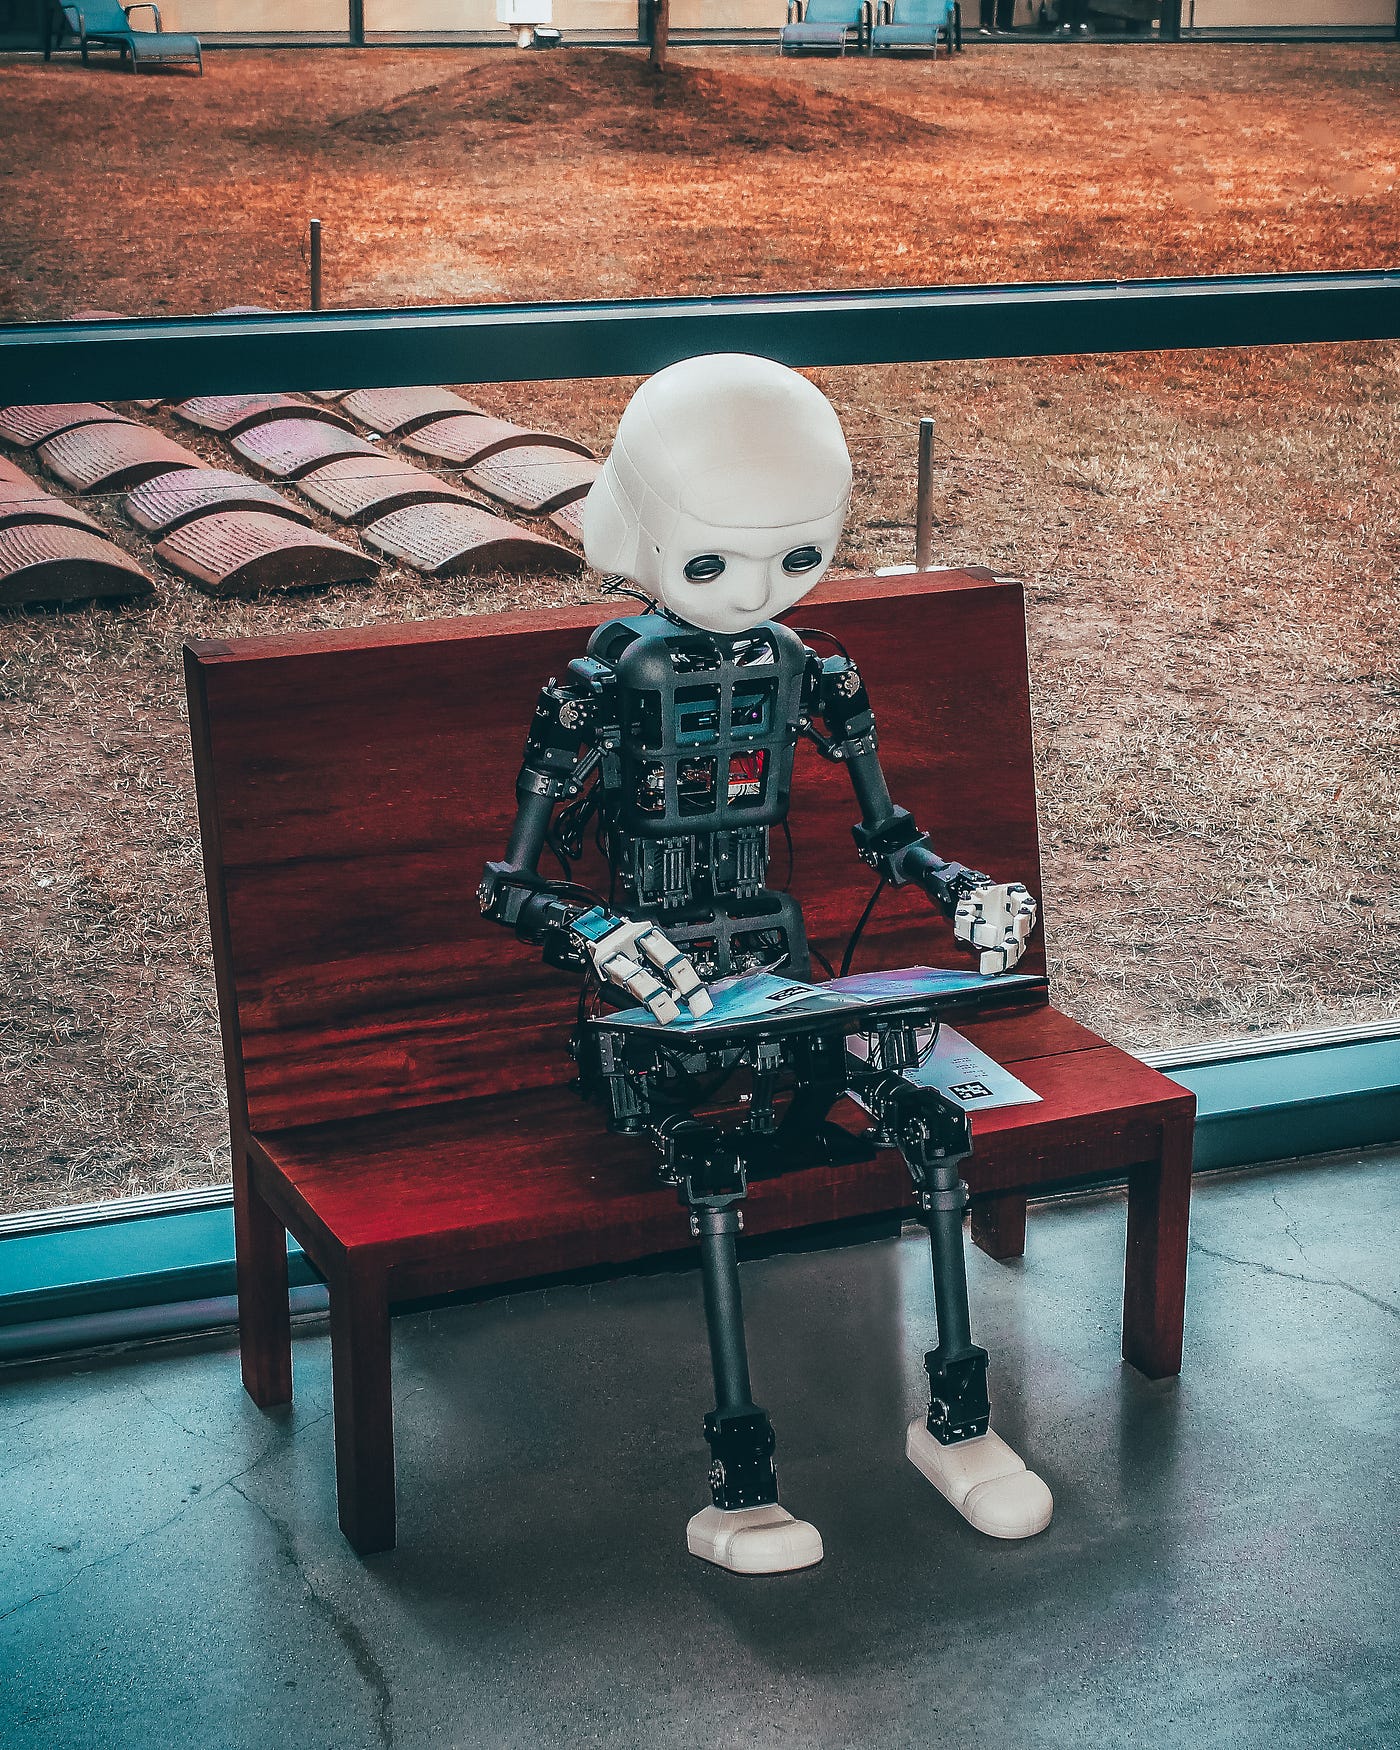 A robot sits on a small wooden bench, typing at a keyboard. The robot’s head is white and solid, while we see his uncovered body’s circuitry.